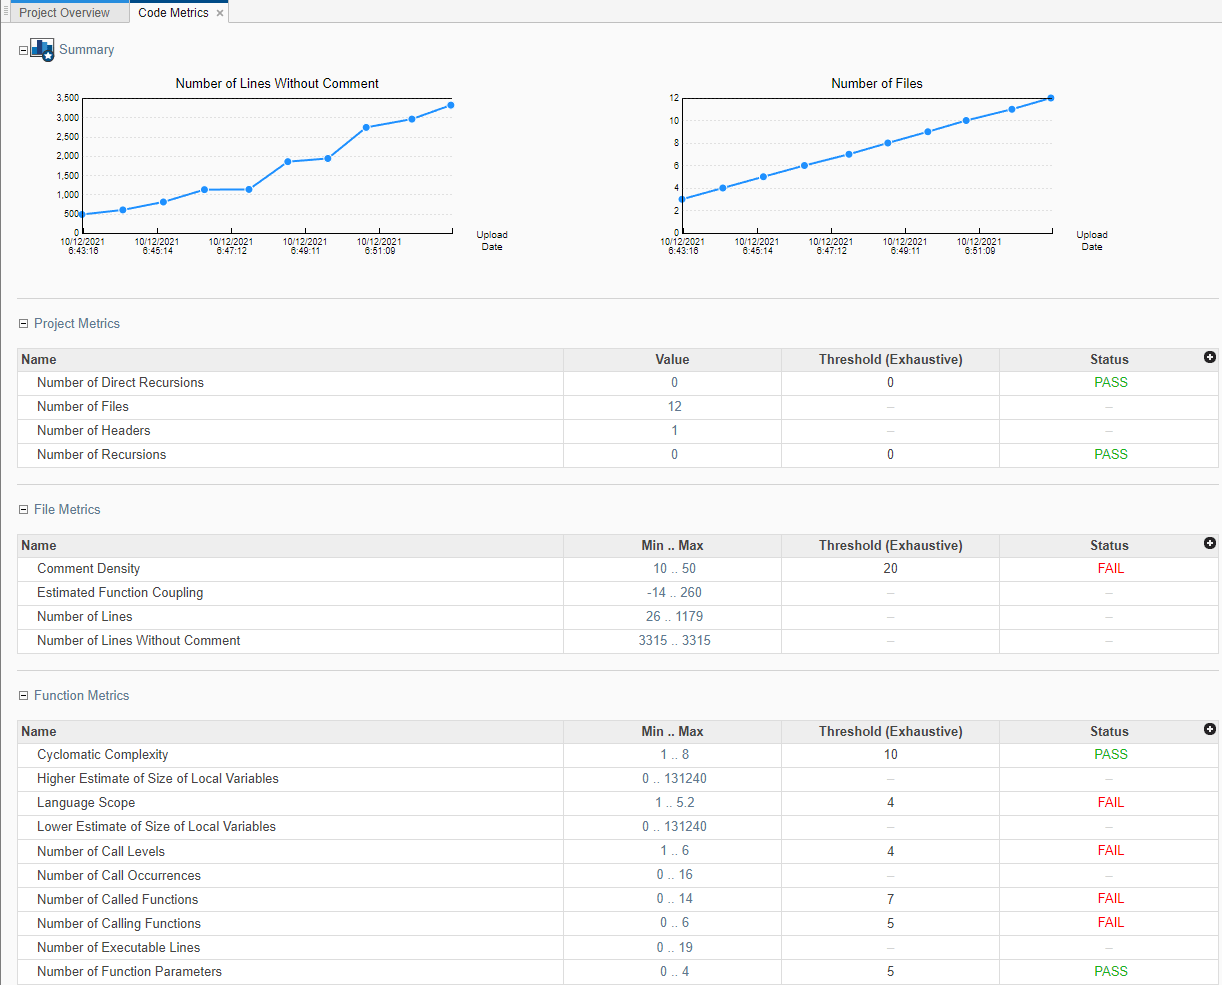 The Summary section of the Code Metrics dashboard shows change in number of files and lines of code over time. The other sections on the dashboard show the current values of various project, file, and function metrics.